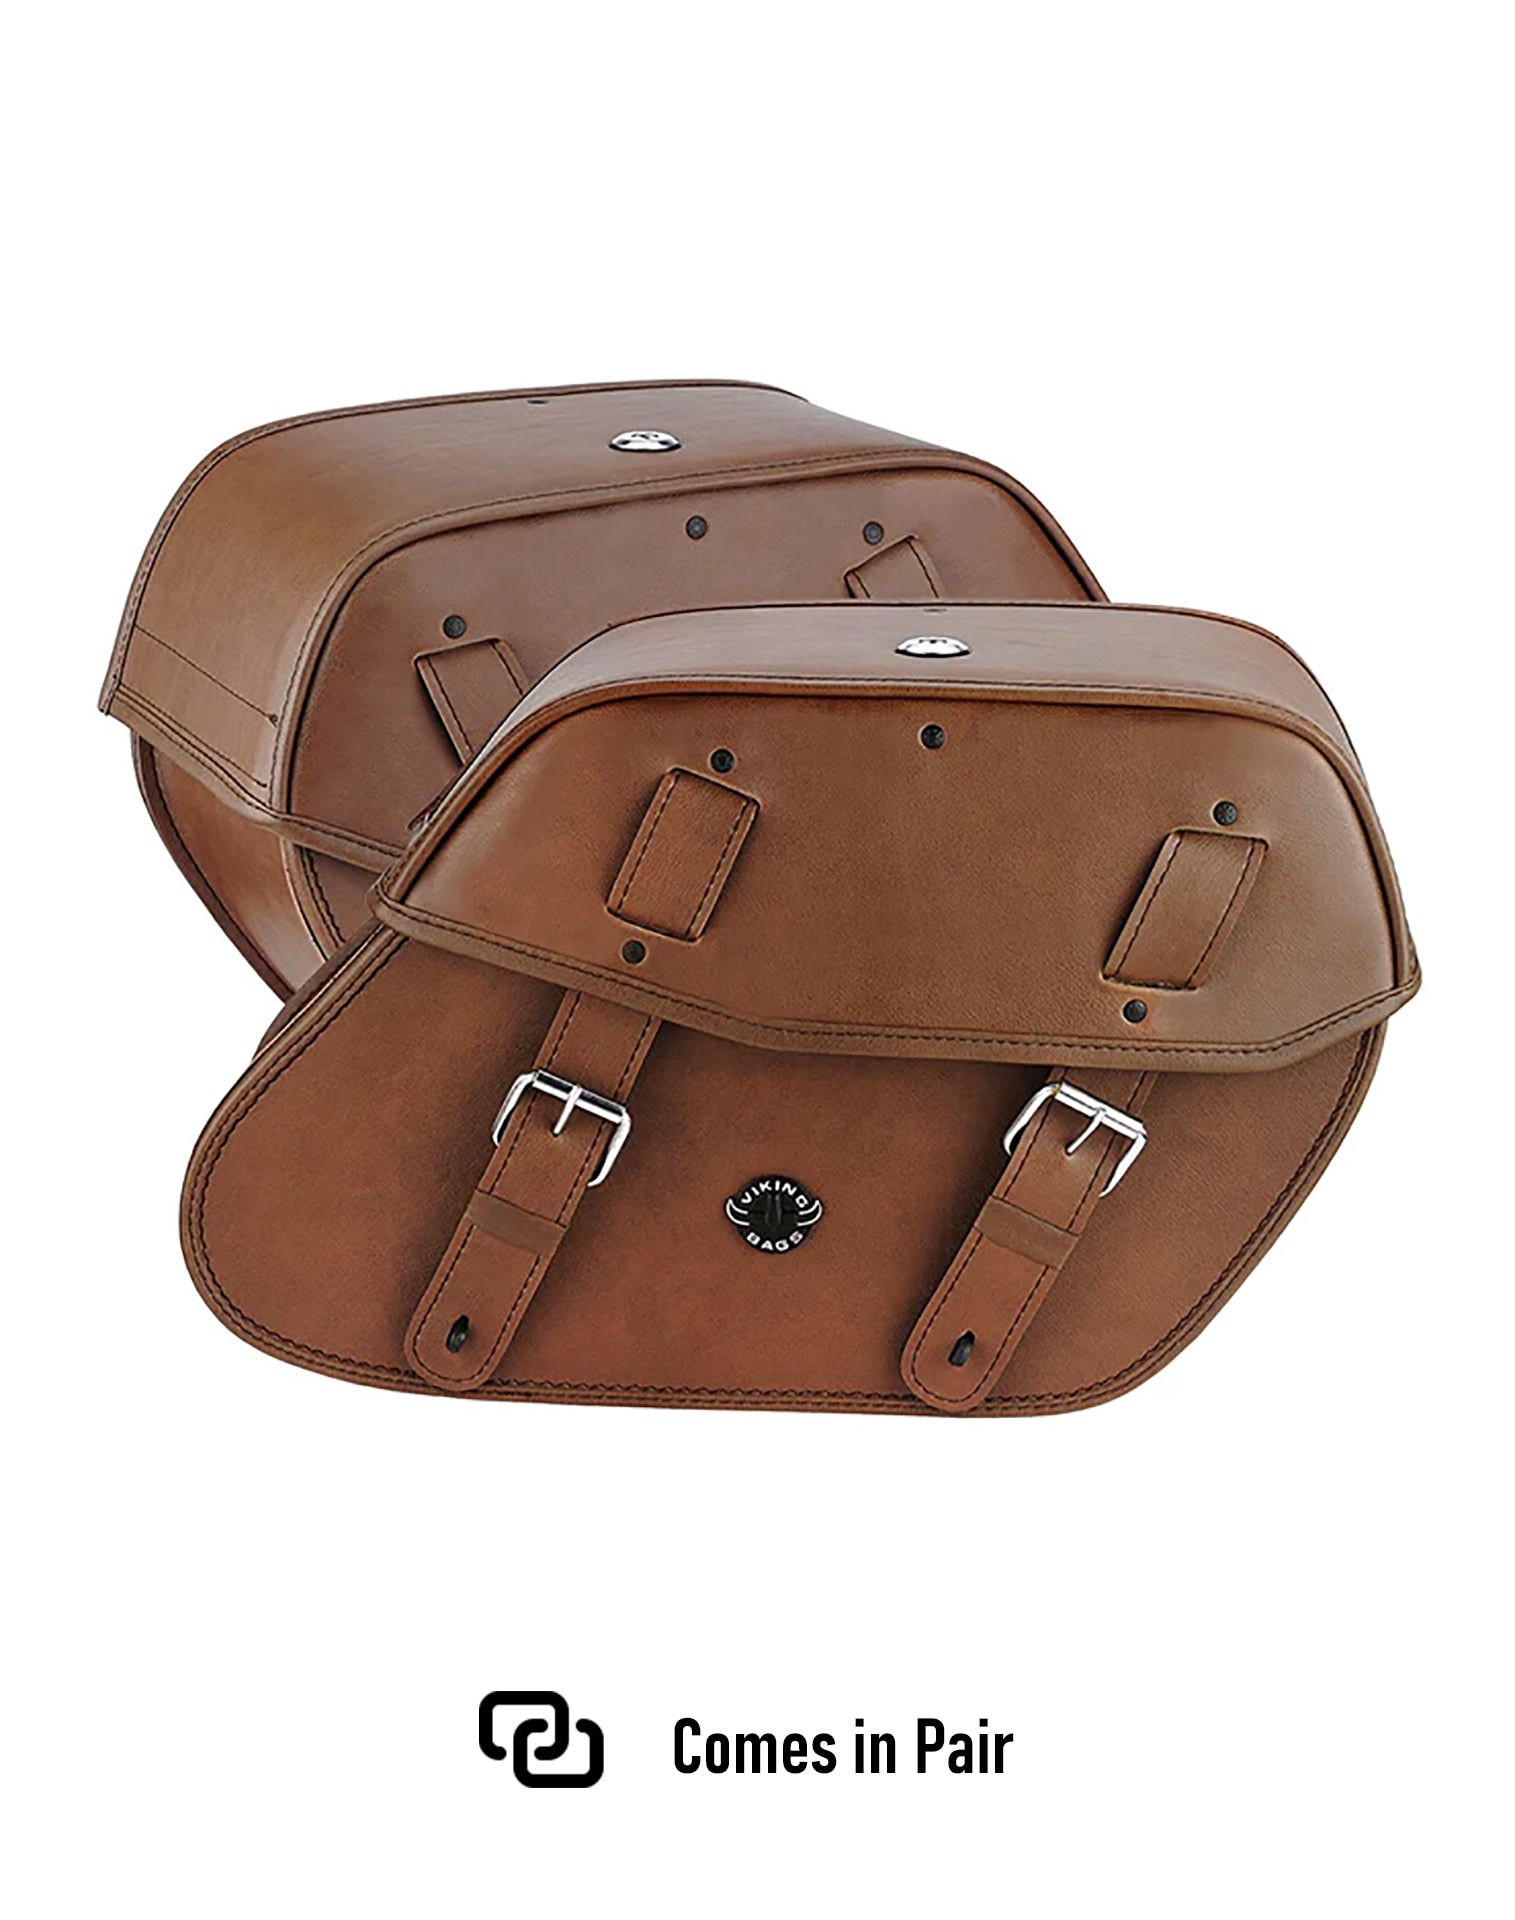 Viking Odin Brown Large Leather Motorcycle Saddlebags For Harley Softail Breakout Fxsb Weather Resistant Bags Comes in Pair